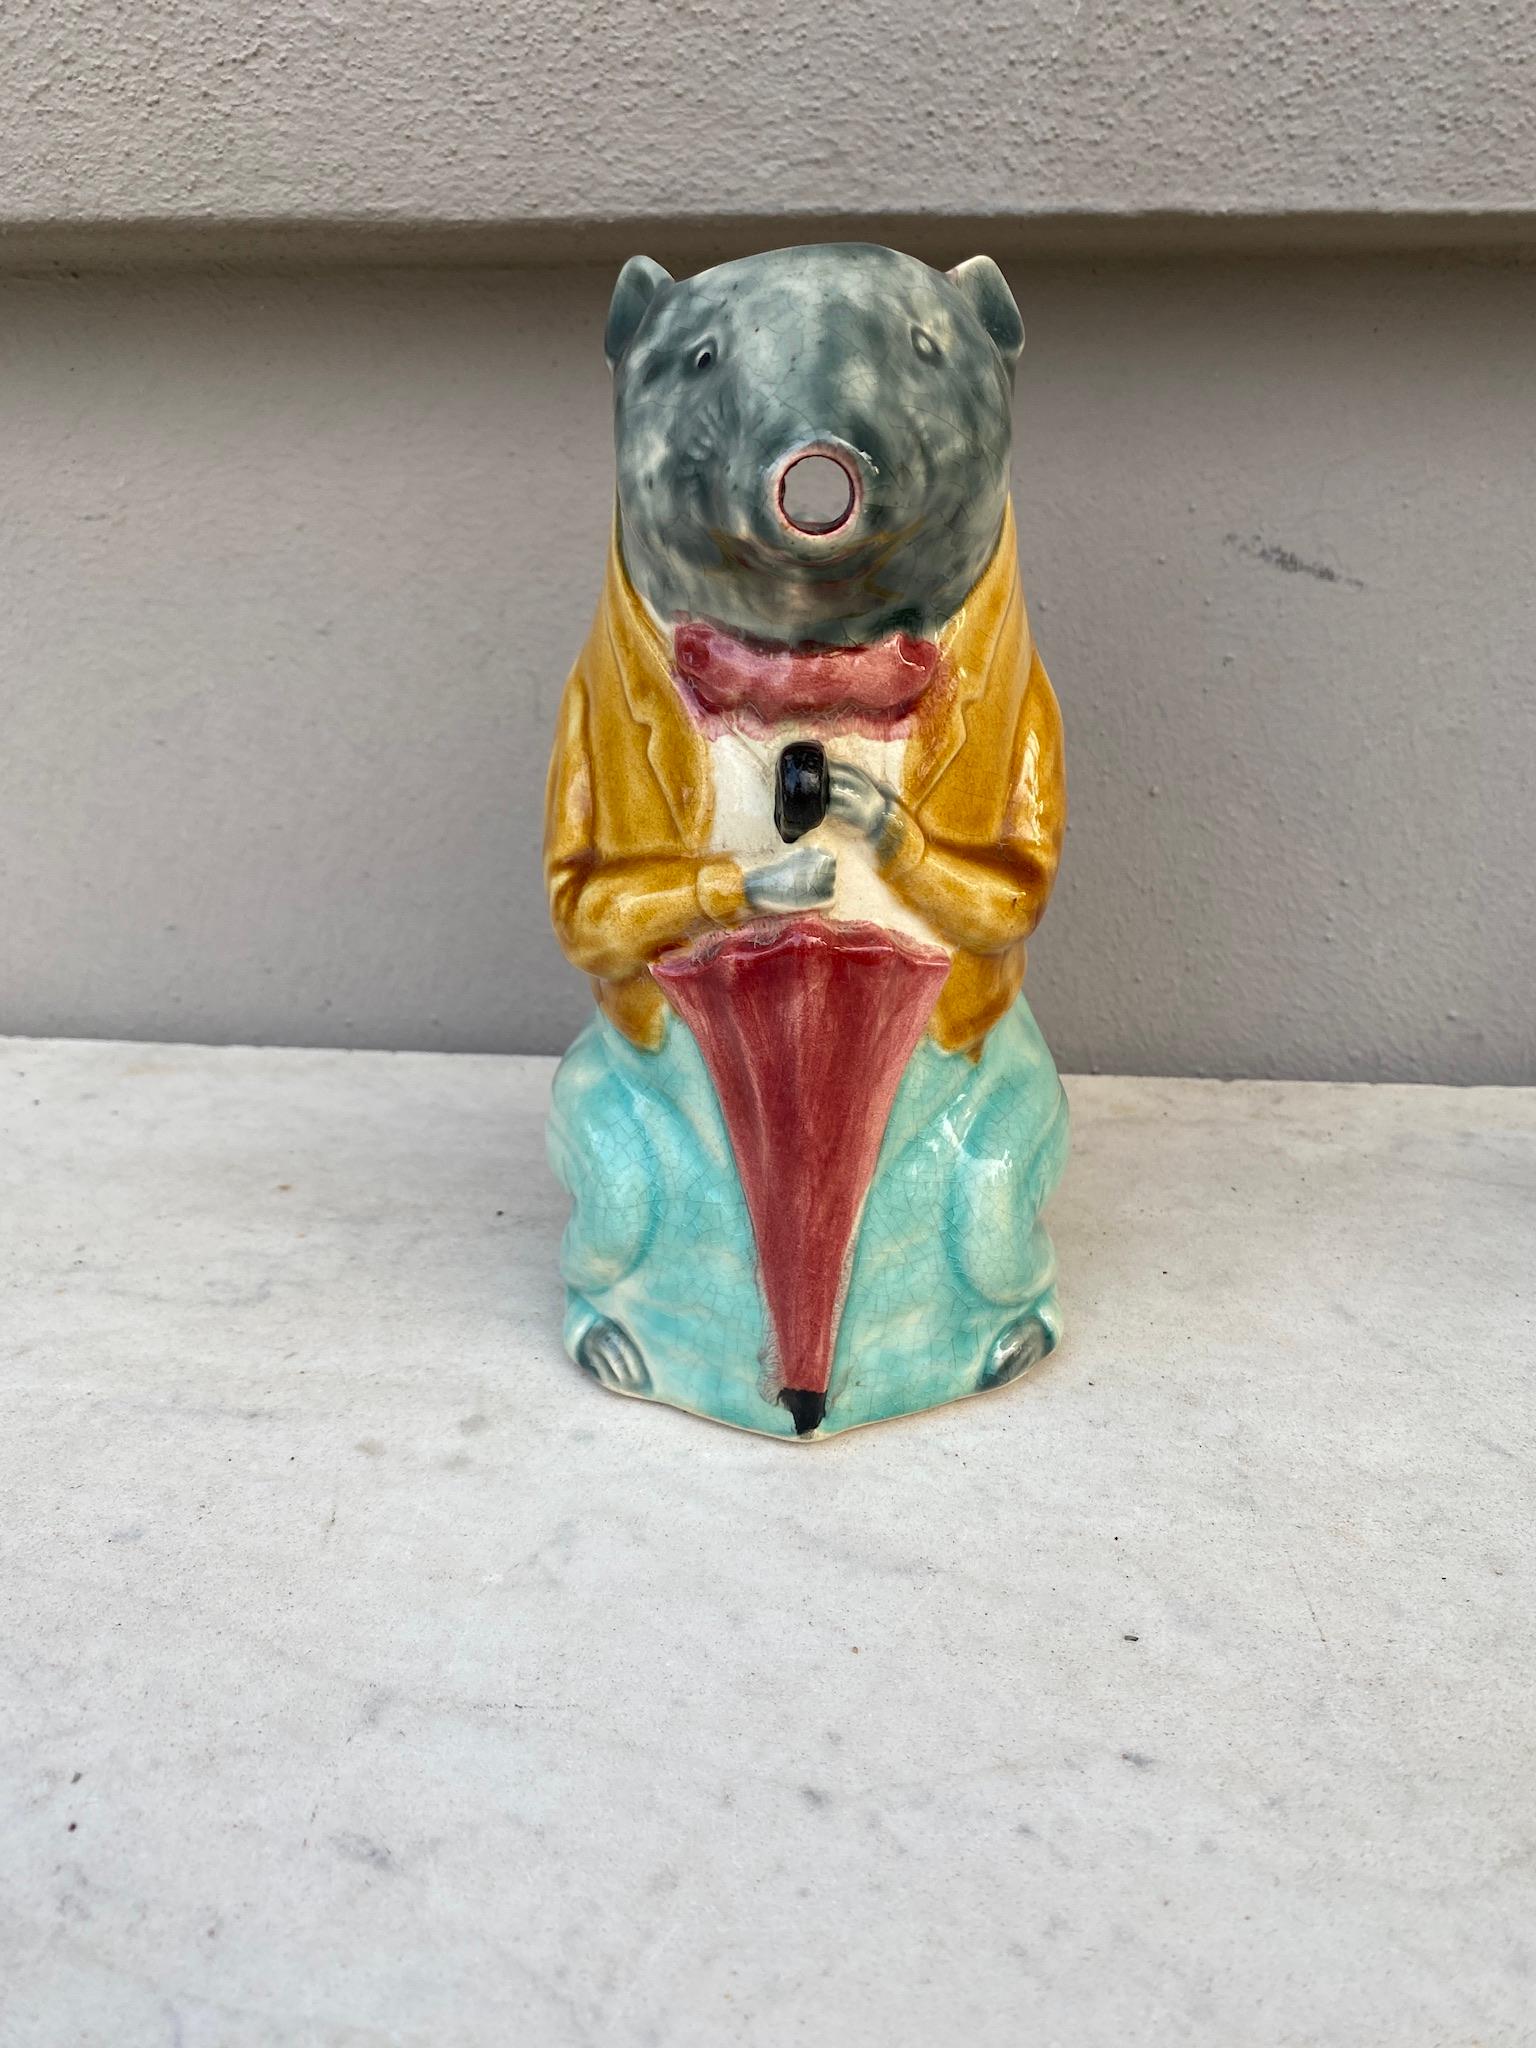 French Majolica Rat Pitcher Poet Laval, circa 1900.
The rat wear a jacket and hold an umbrella.